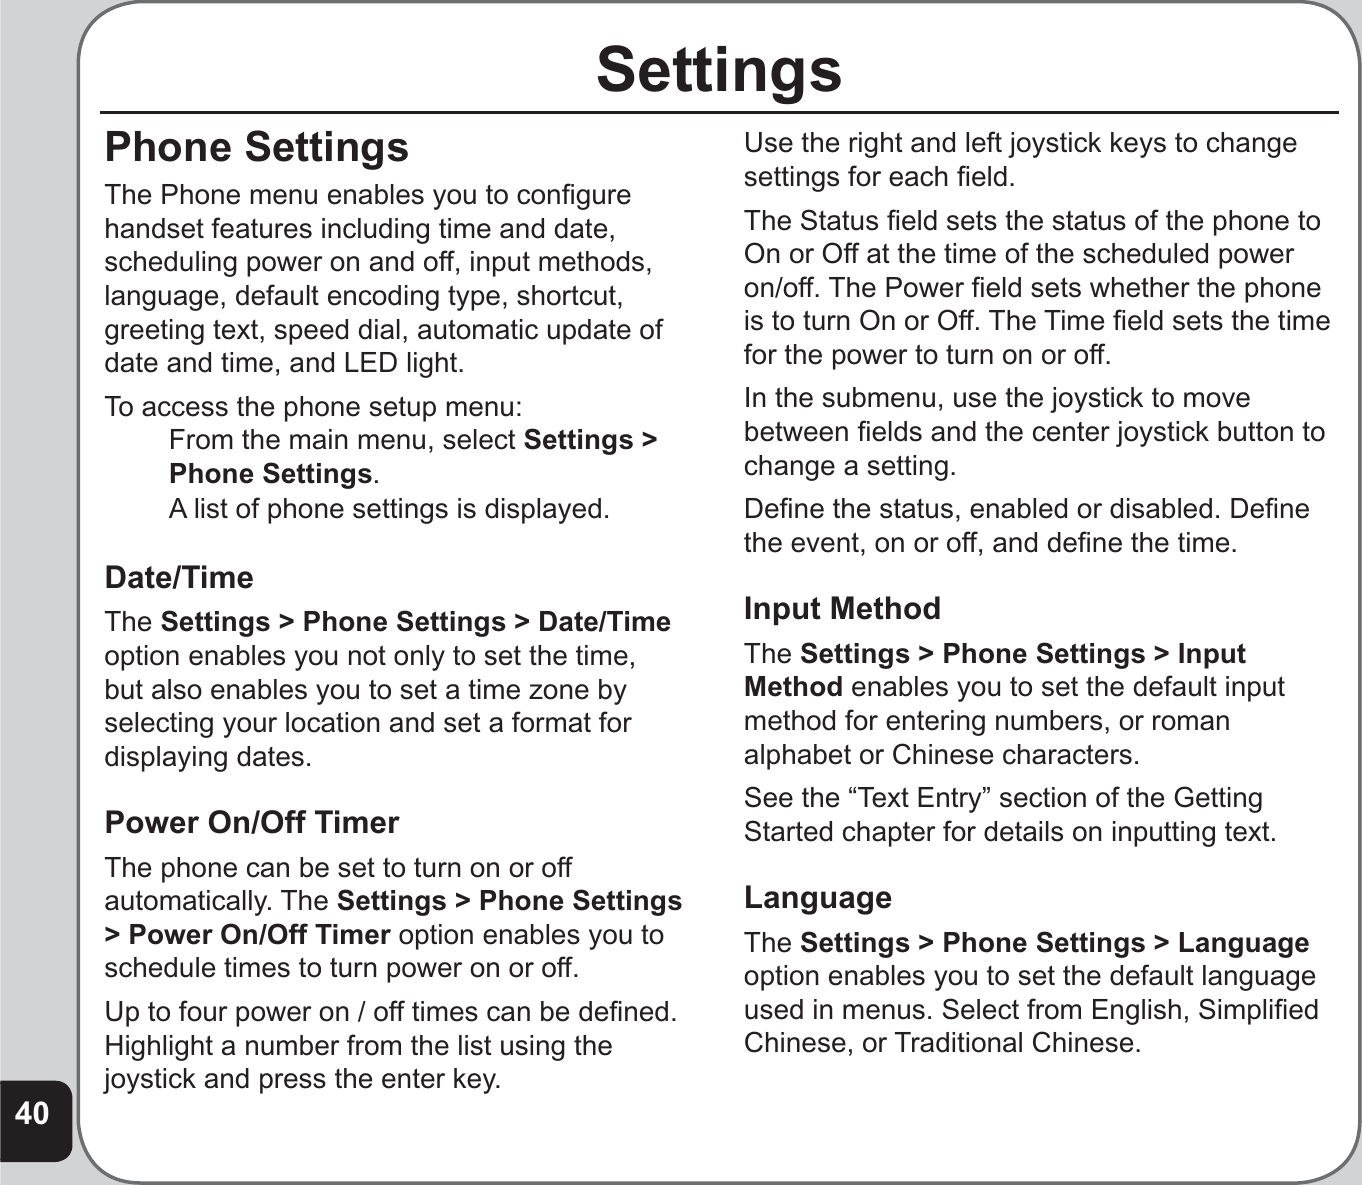 40SettingsPhone SettingsThe Phone menu enables you to conﬁ gure handset features including time and date, scheduling power on and off, input methods, language, default encoding type, shortcut, greeting text, speed dial, automatic update of date and time, and LED light.To access the phone setup menu:  From the main menu, select Settings &gt; Phone Settings.  A list of phone settings is displayed.Date/TimeThe Settings &gt; Phone Settings &gt; Date/Timeoption enables you not only to set the time, but also enables you to set a time zone by selecting your location and set a format for displaying dates. Power On/Off TimerThe phone can be set to turn on or off automatically. The Settings &gt; Phone Settings &gt; Power On/Off Timer option enables you to schedule times to turn power on or off.Up to four power on / off times can be deﬁ ned. Highlight a number from the list using the joystick and press the enter key.Use the right and left joystick keys to change settings for each ﬁ eld. The Status ﬁ eld sets the status of the phone to On or Off at the time of the scheduled power on/off. The Power ﬁ eld sets whether the phone is to turn On or Off. The Time ﬁ eld sets the time for the power to turn on or off. In the submenu, use the joystick to move between ﬁ elds and the center joystick button to change a setting.Deﬁ ne the status, enabled or disabled. Deﬁ ne the event, on or off, and deﬁ ne the time.Input MethodThe Settings &gt; Phone Settings &gt; Input Method enables you to set the default input method for entering numbers, or roman alphabet or Chinese characters. See the “Text Entry” section of the Getting Started chapter for details on inputting text.LanguageThe Settings &gt; Phone Settings &gt; Languageoption enables you to set the default language used in menus. Select from English, Simpliﬁ ed Chinese, or Traditional Chinese.